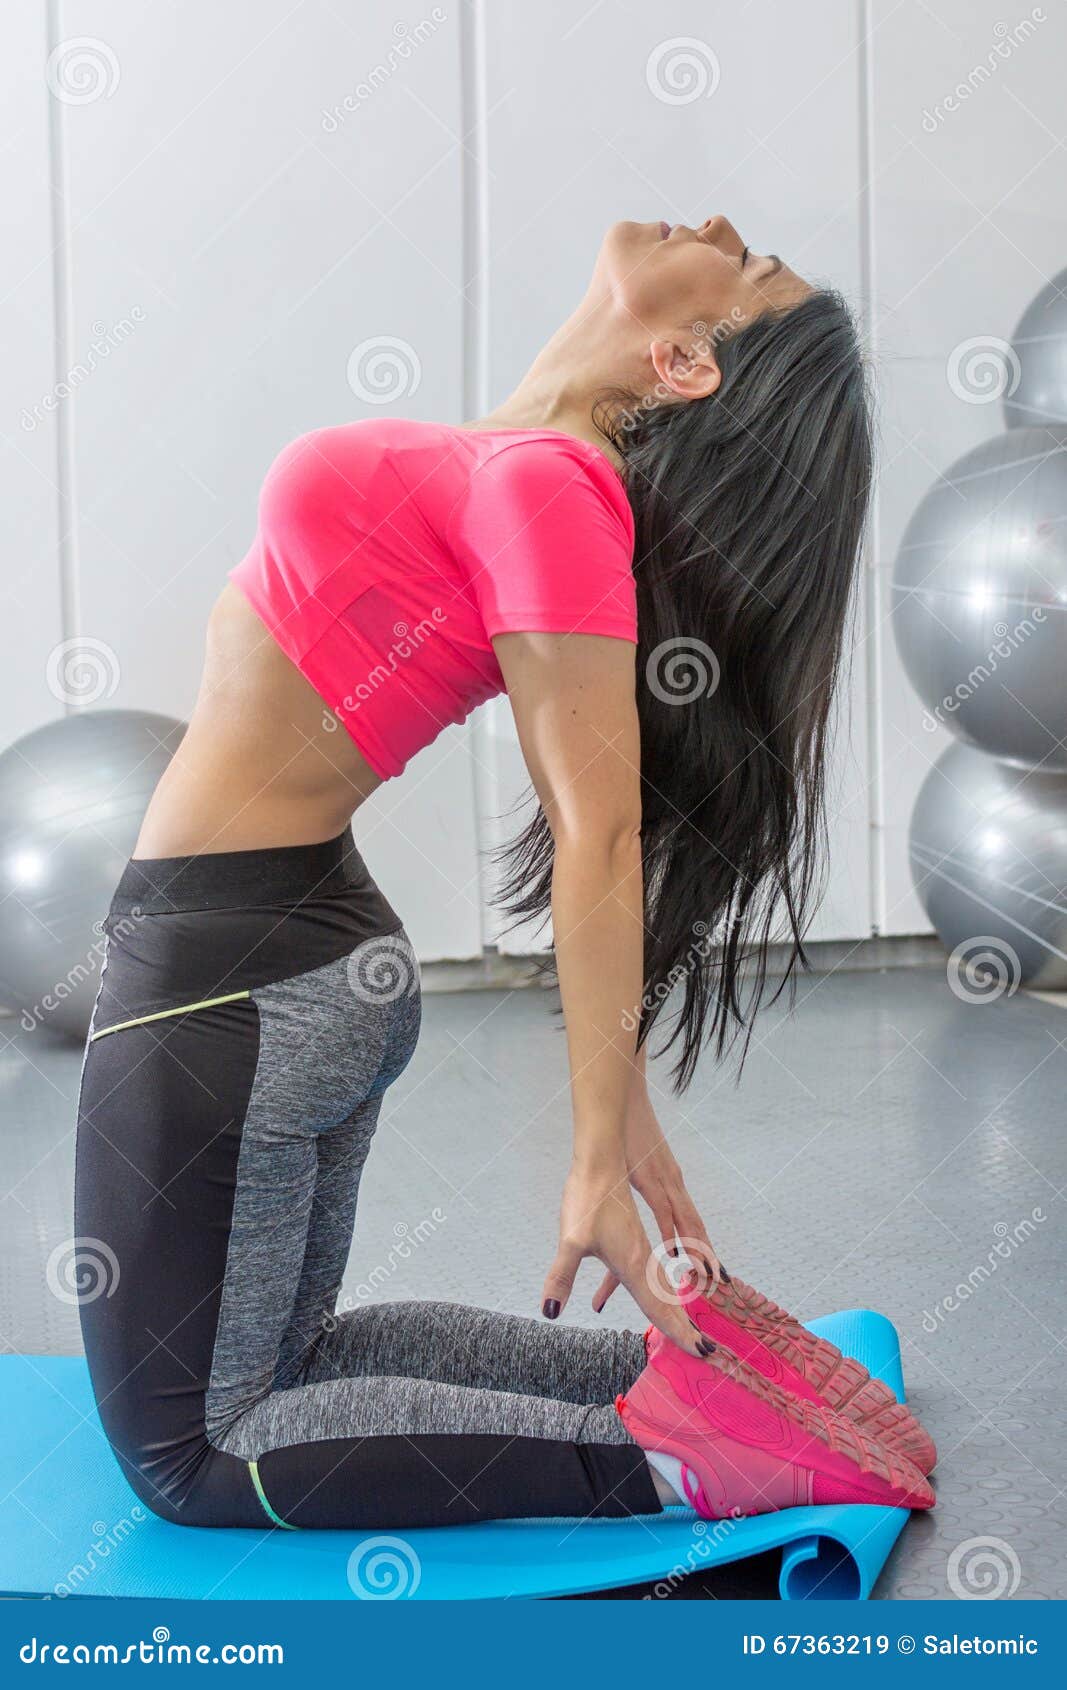 Brunette Stretching On A Mat Stock Image Image Of Healthy Lifestyle